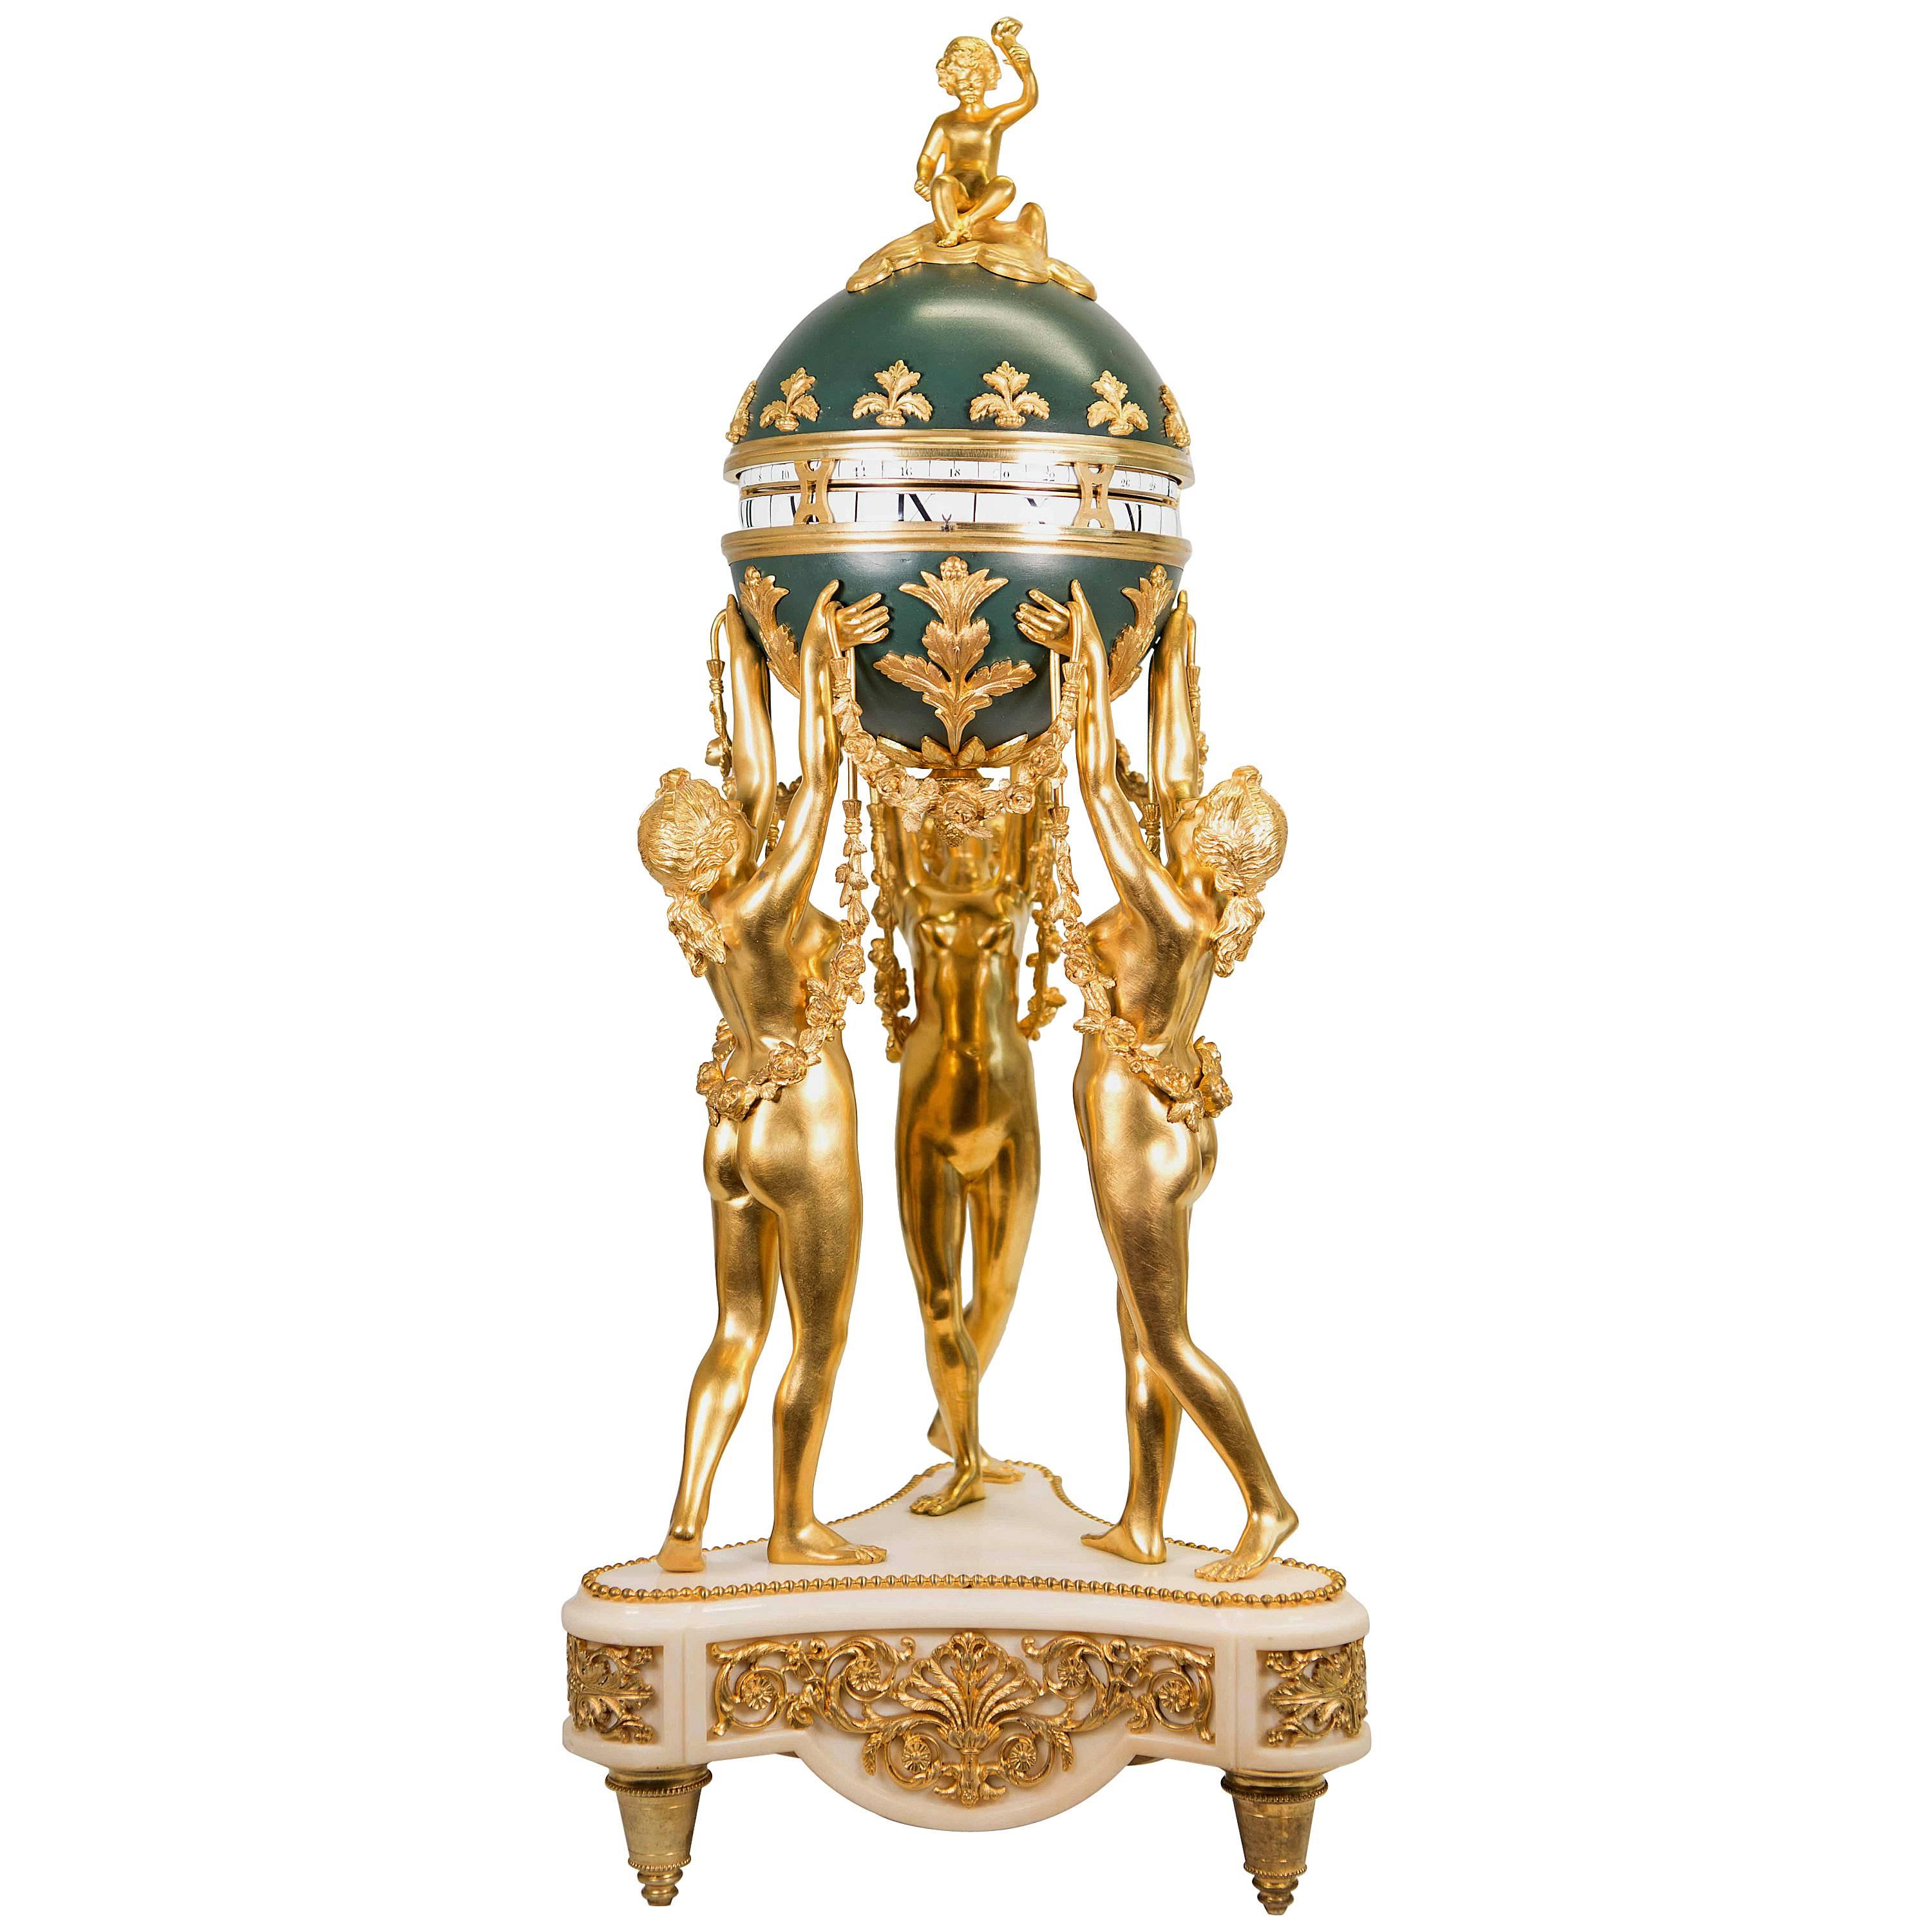 Three Graces Louis XVI Style Cercle Tournant in Ormolu Bronze and Marble